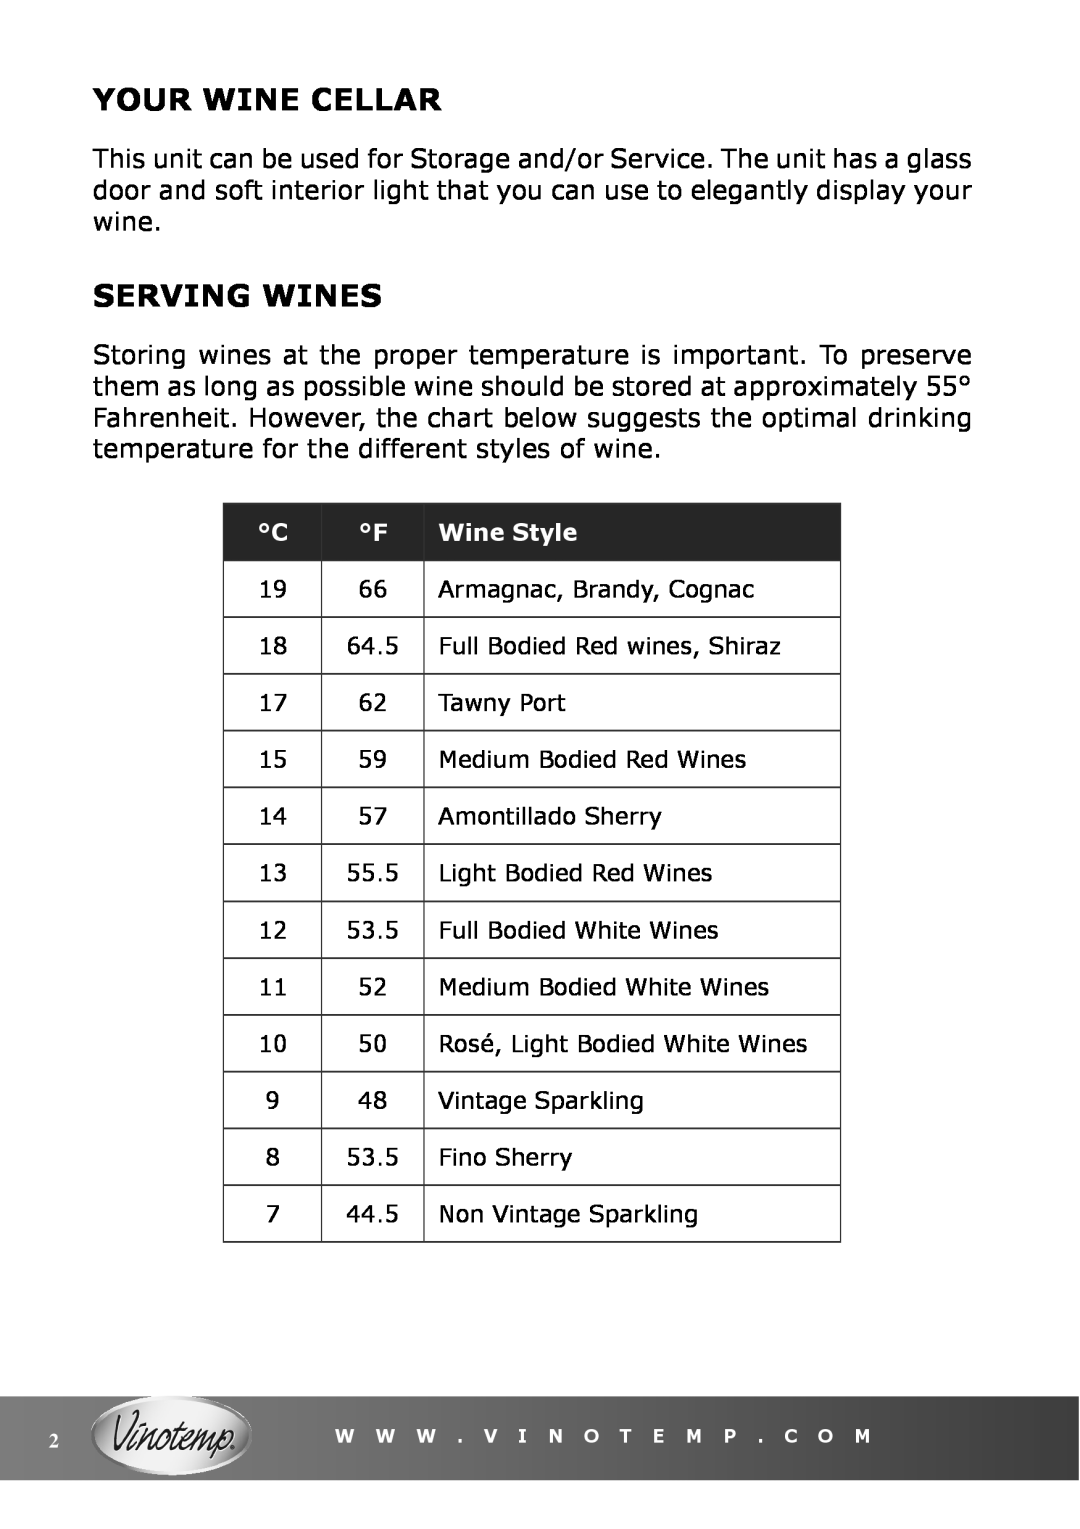 Vinotemp VT-6TEDS owner manual Your Wine Cellar, Serving Wines, Wine Style 